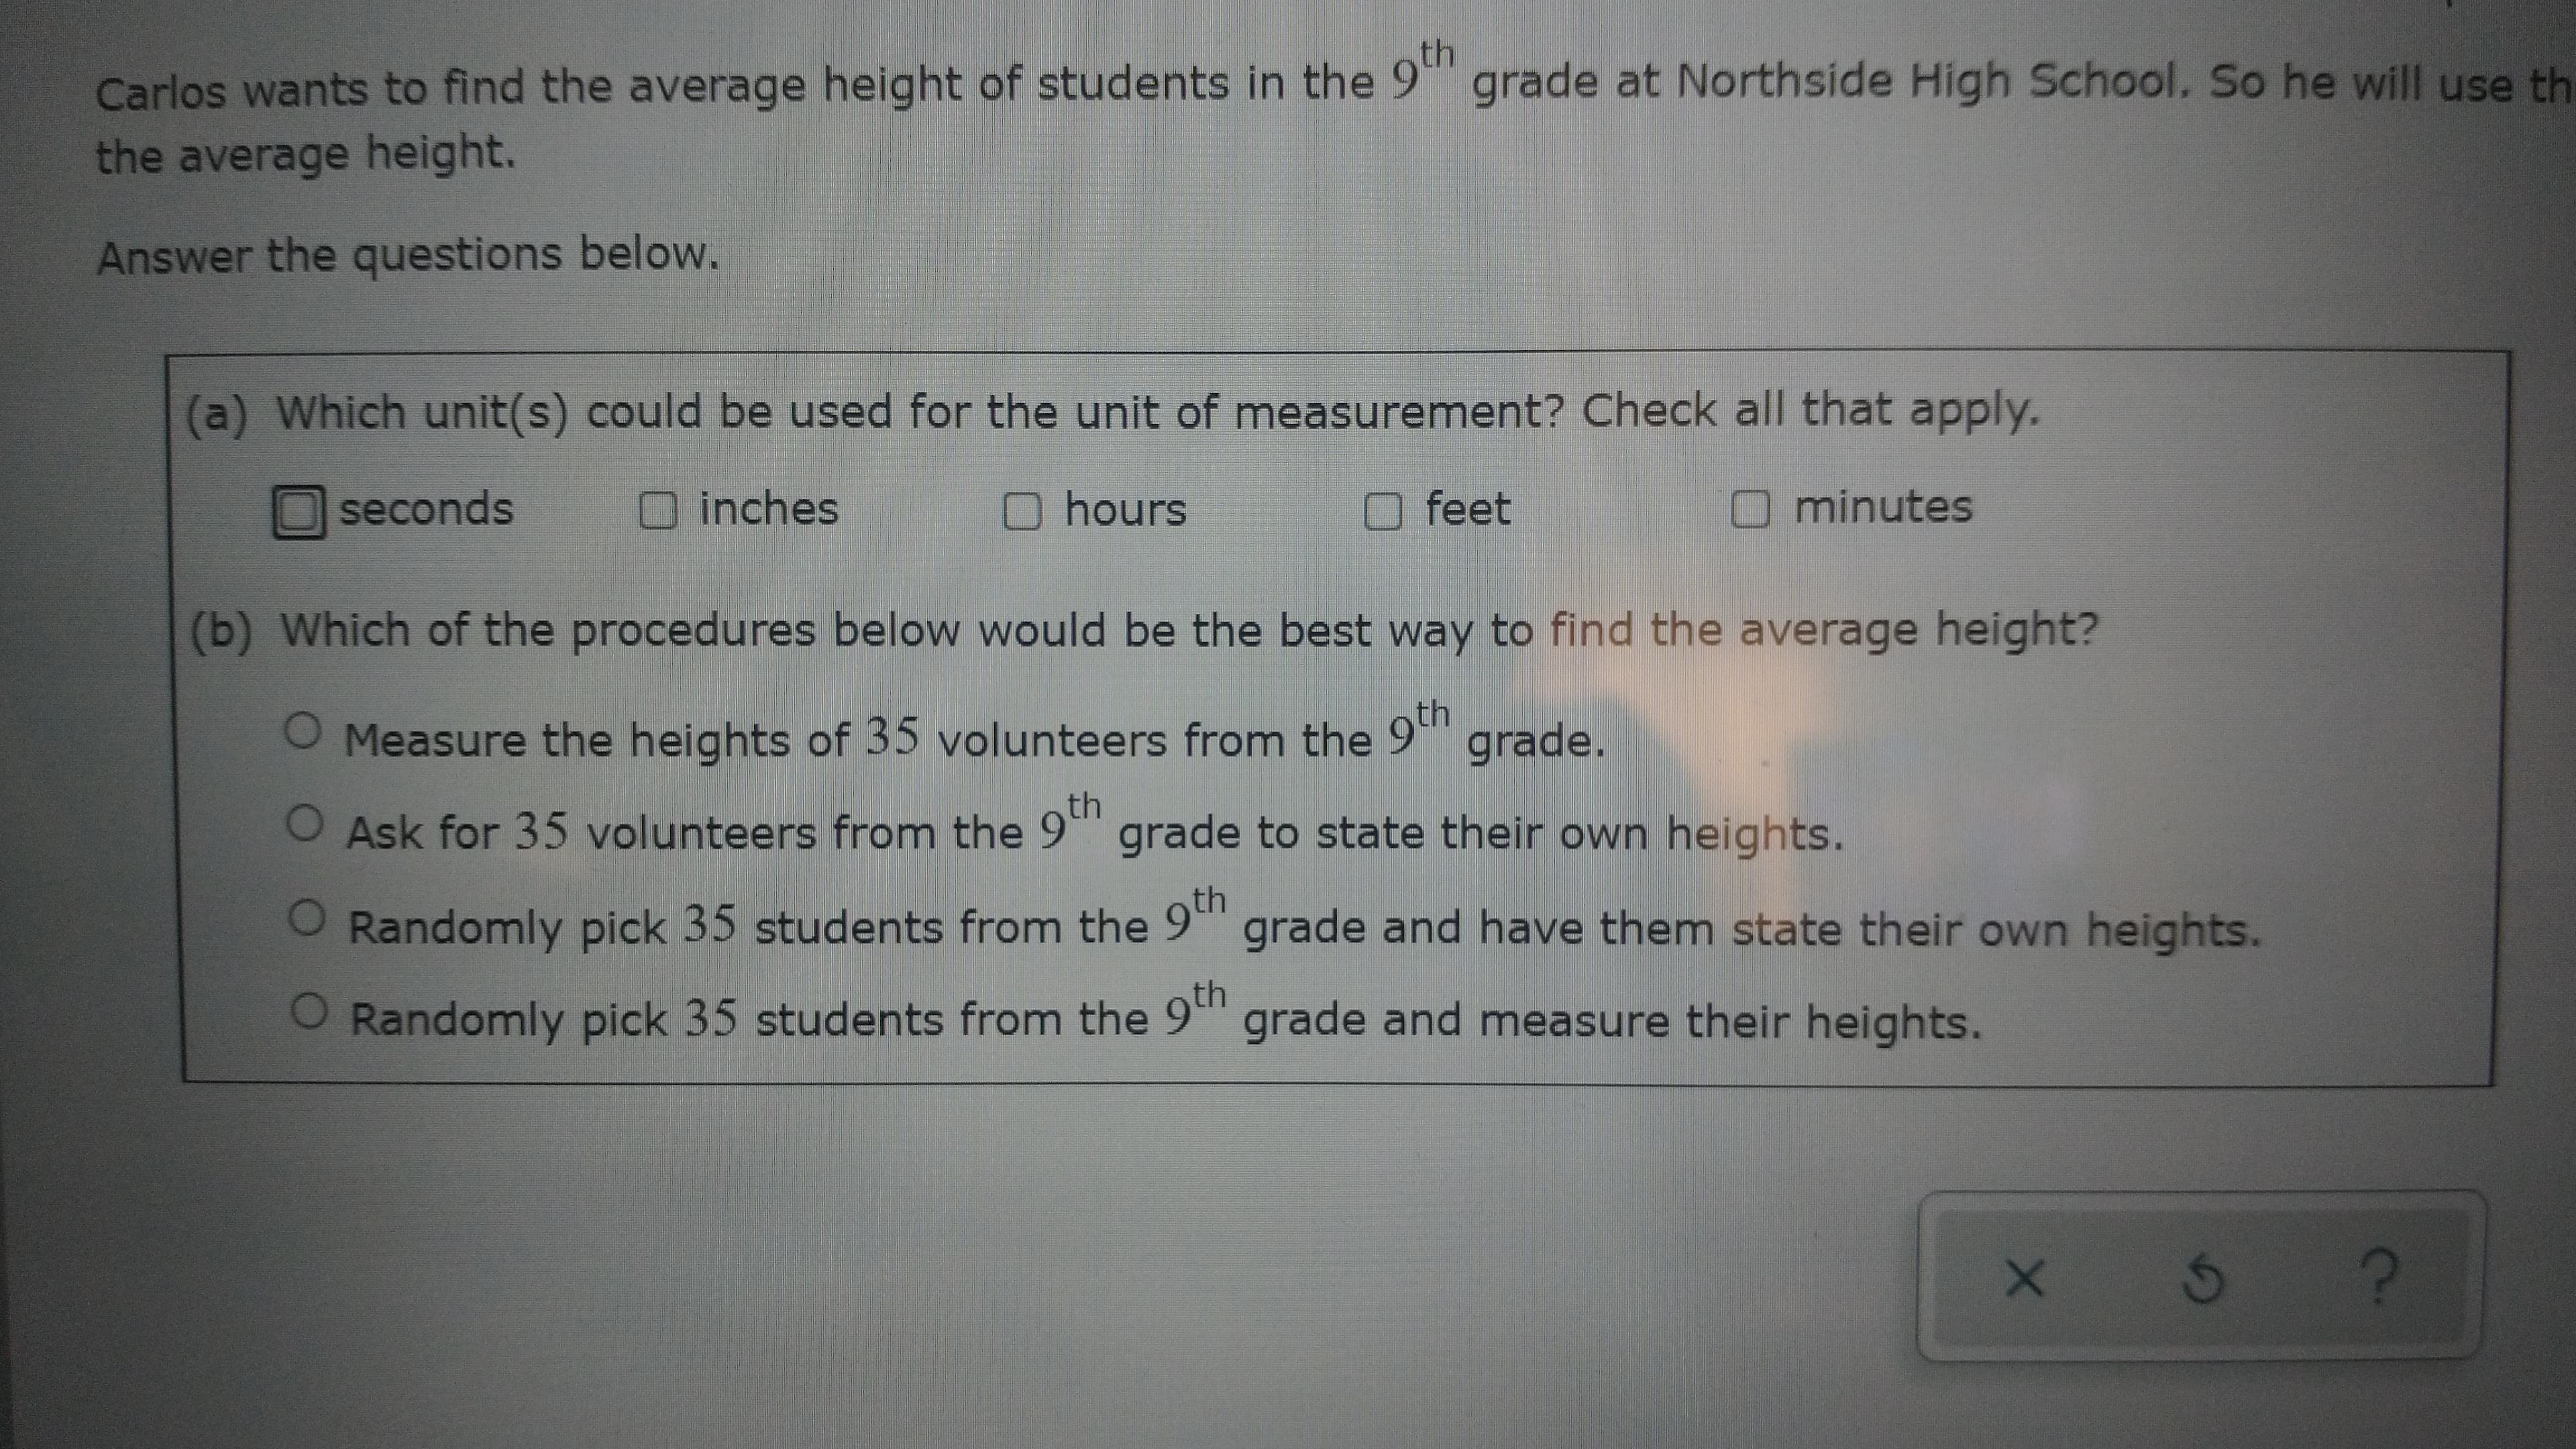 Carlos wants to find the average height of students in the 9 grade at Northside High School. So he will use th
the average height.
Answer the questions below.
(a) Which unit(s) could be used for the unit of measurement? Check all that apply.
seconds
Ohours
feet
Ominutes
Oinches
(b) Which of the procedures below would be the best way to find the average height?
O Measure the heights of 35 volunteers from the 9"
grade.
th
OAsk for 35 volunteers from the 9""
grade to state their own heights.
O Randomly pick 35 students from the 9'
grade and have them state their own heights.
O Randomly pick 35 students from the 9t
grade and measure their heights.
O Randomly pick 35 students from the 9th
